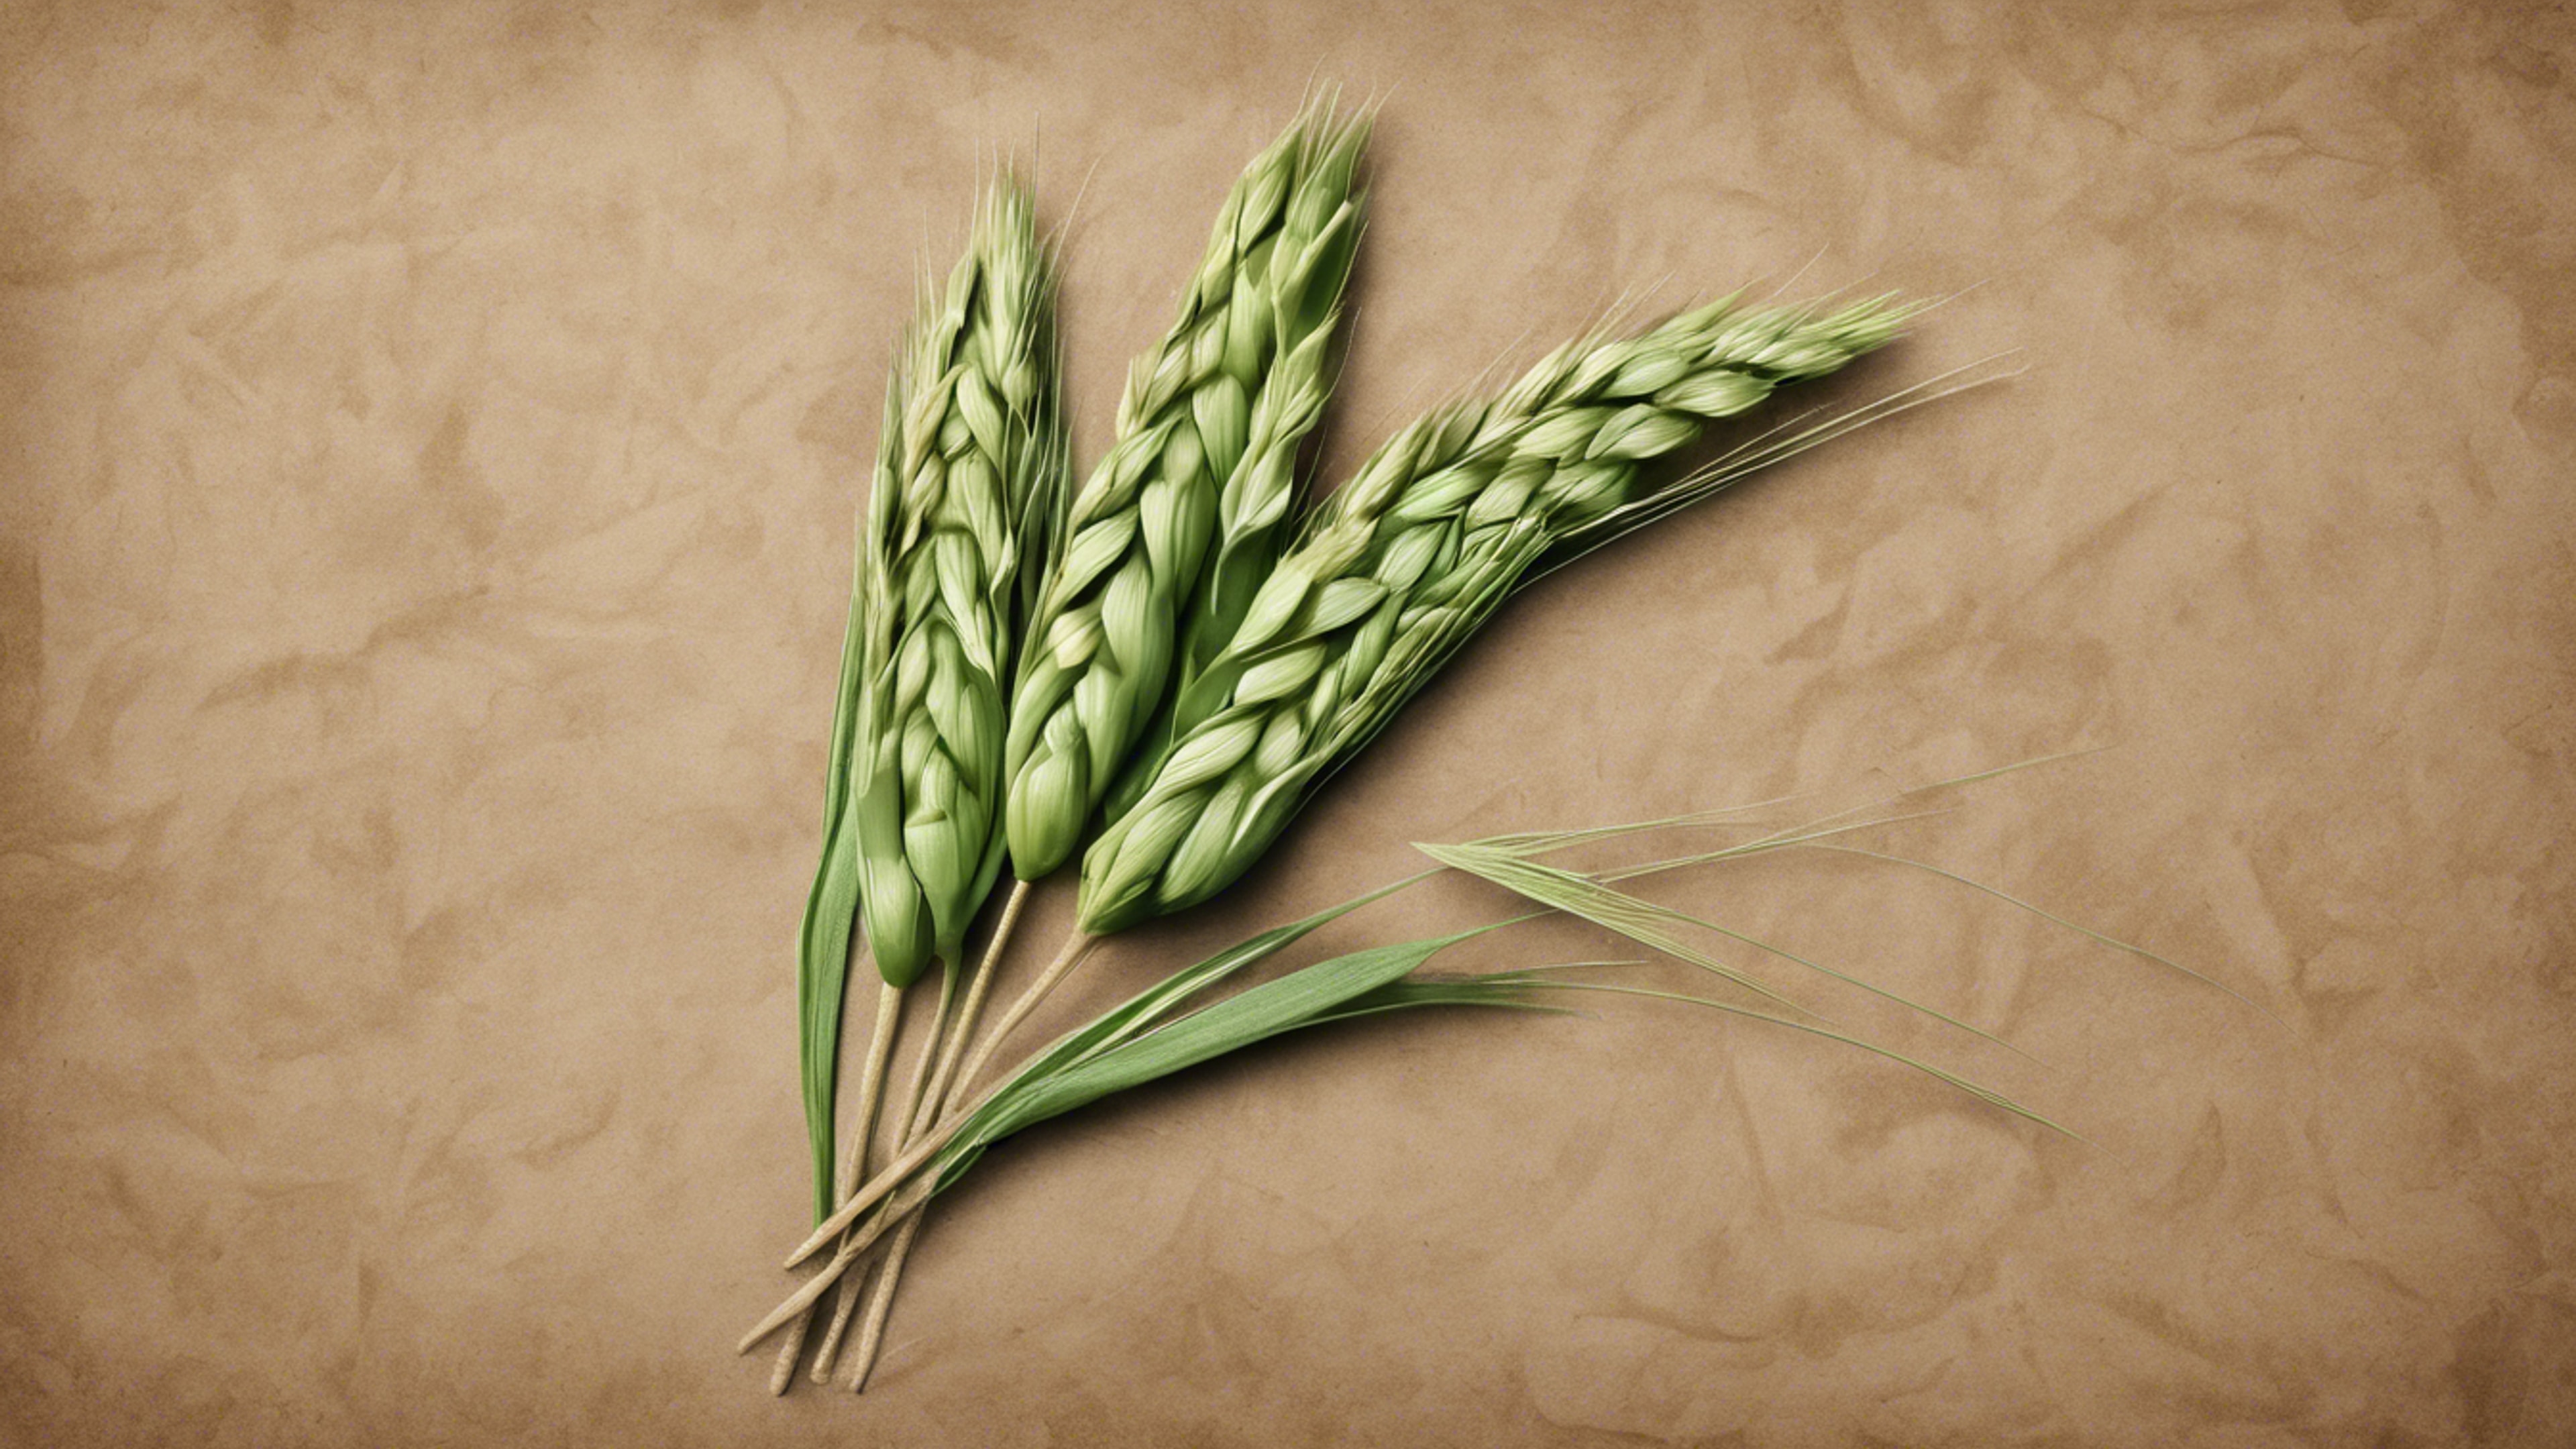 A detailed botanical illustration of a stalk of green wheat against an aged brown paper background. Tapeta[958050ab552342b3bed0]